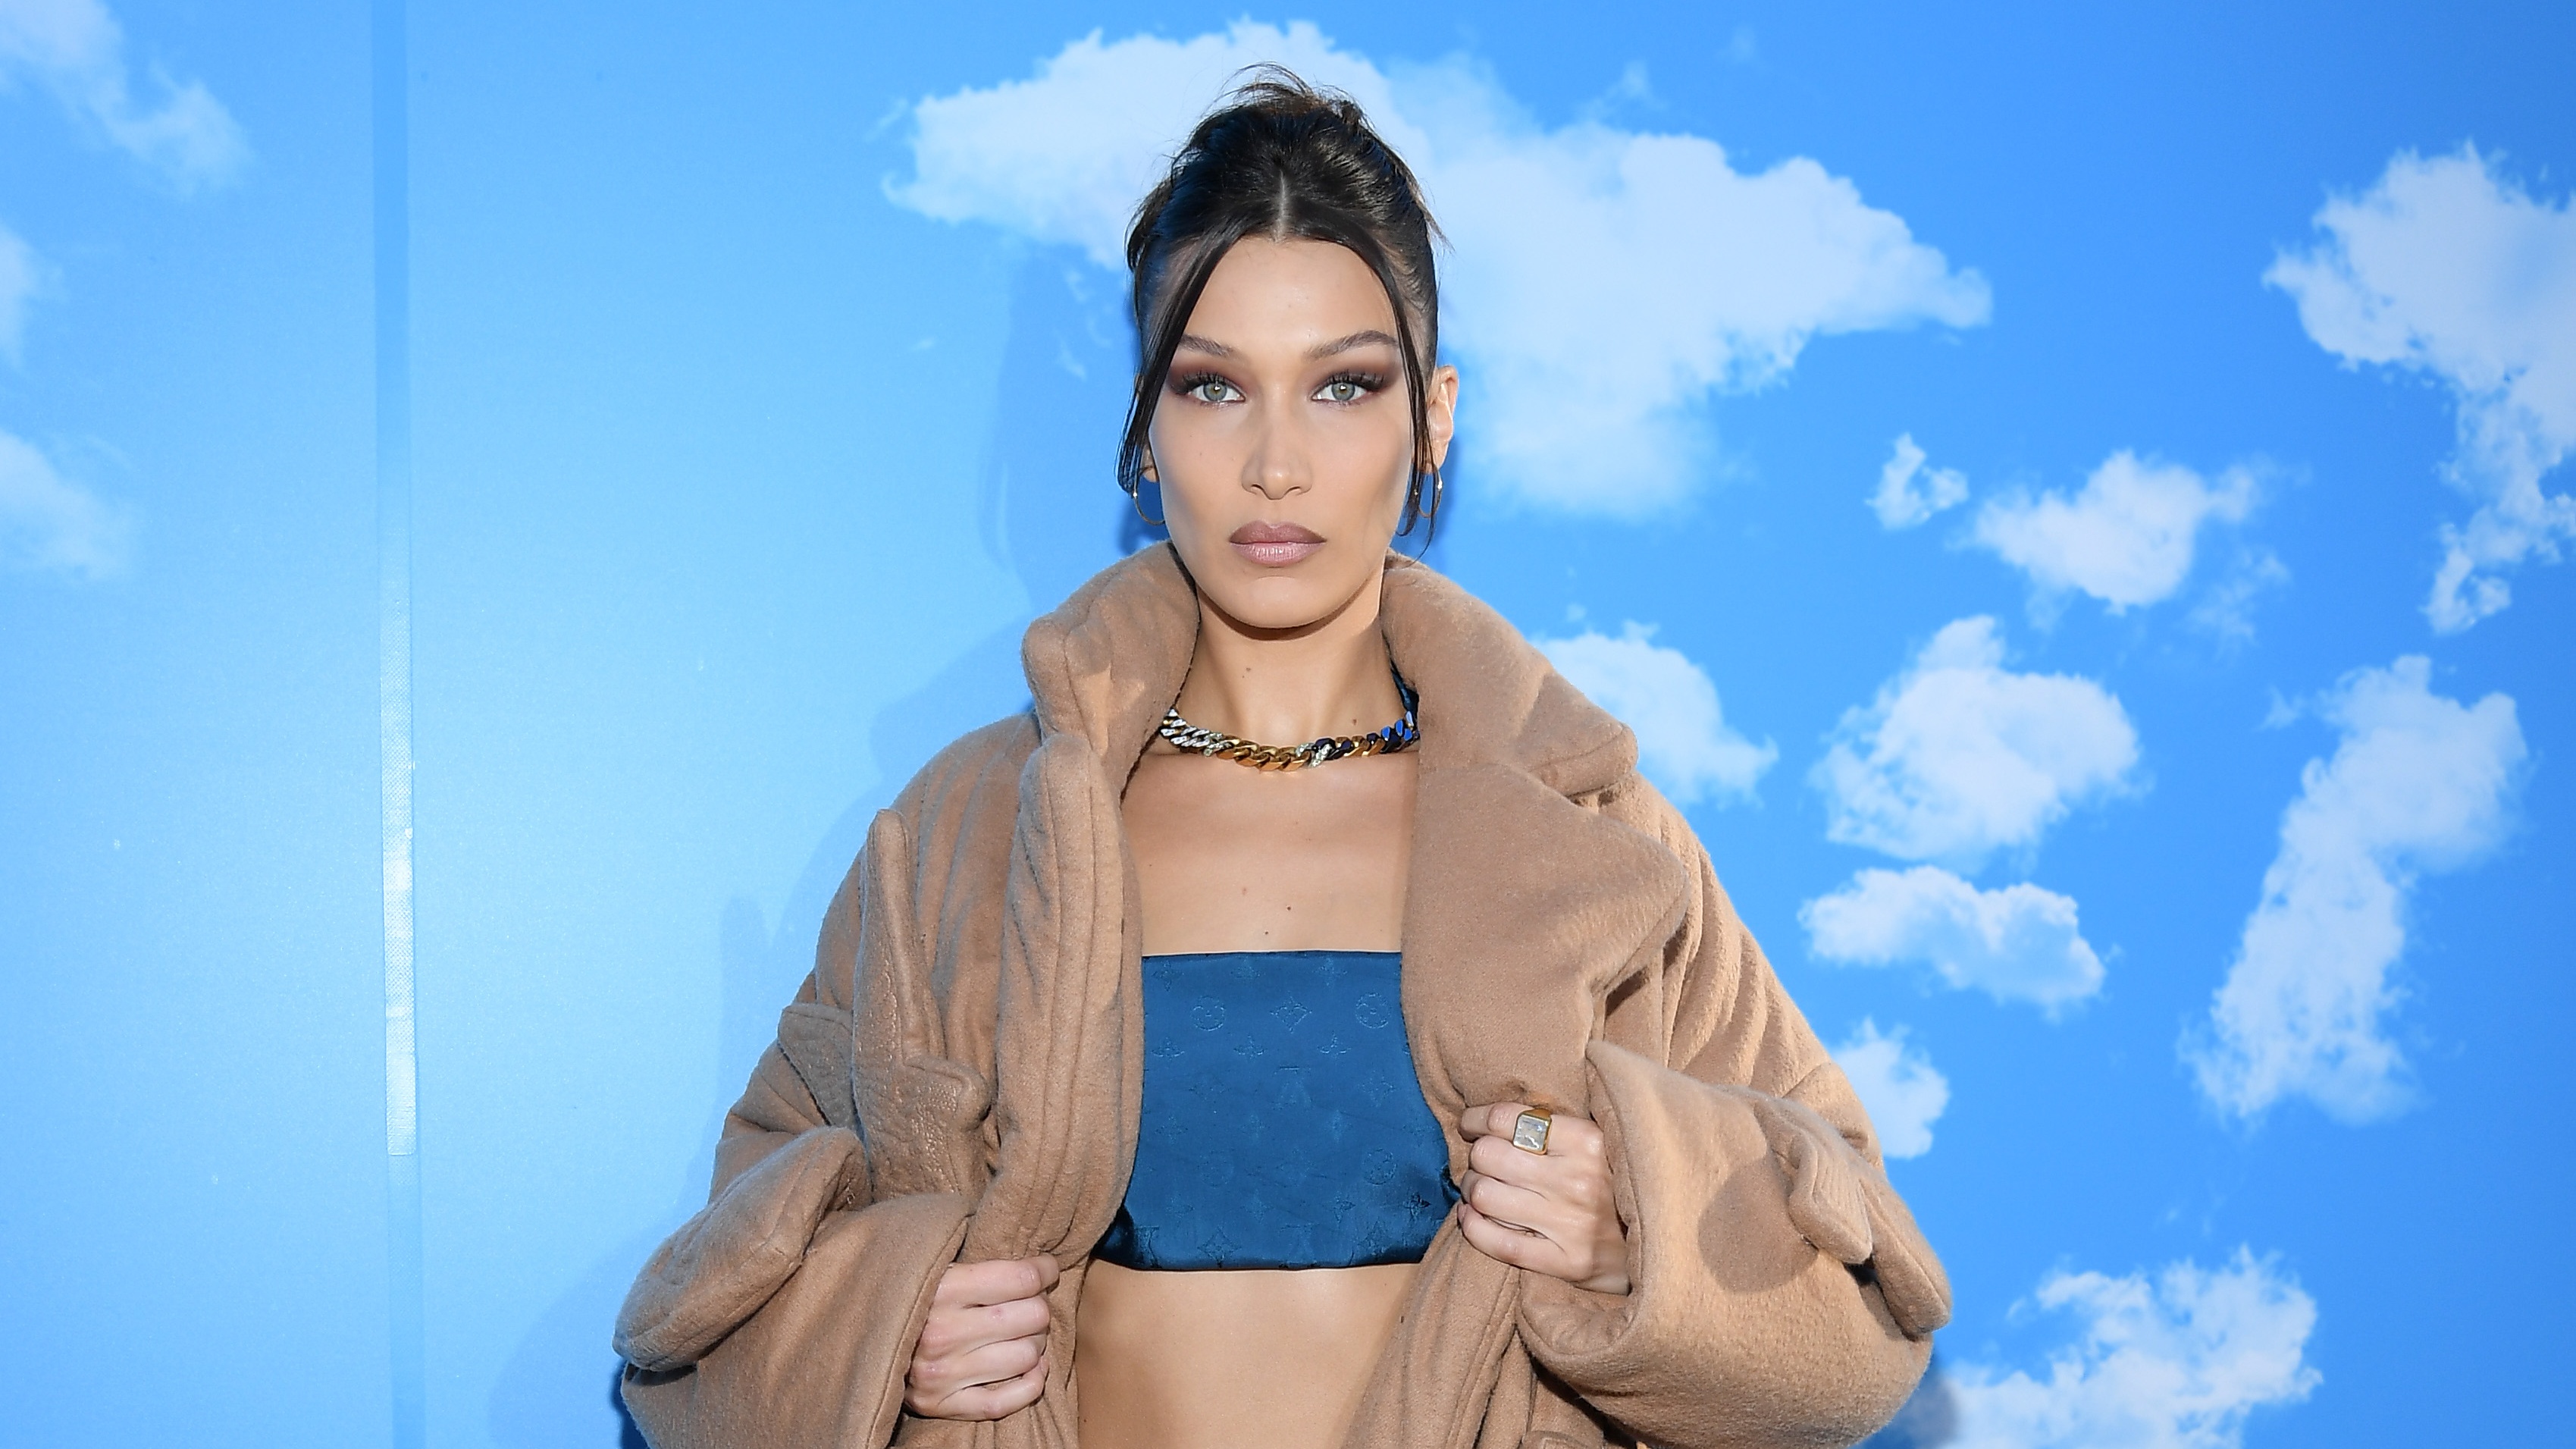 Louis Vuitton Heads to Texas, Bella Hadid Is the World's Most Beautiful